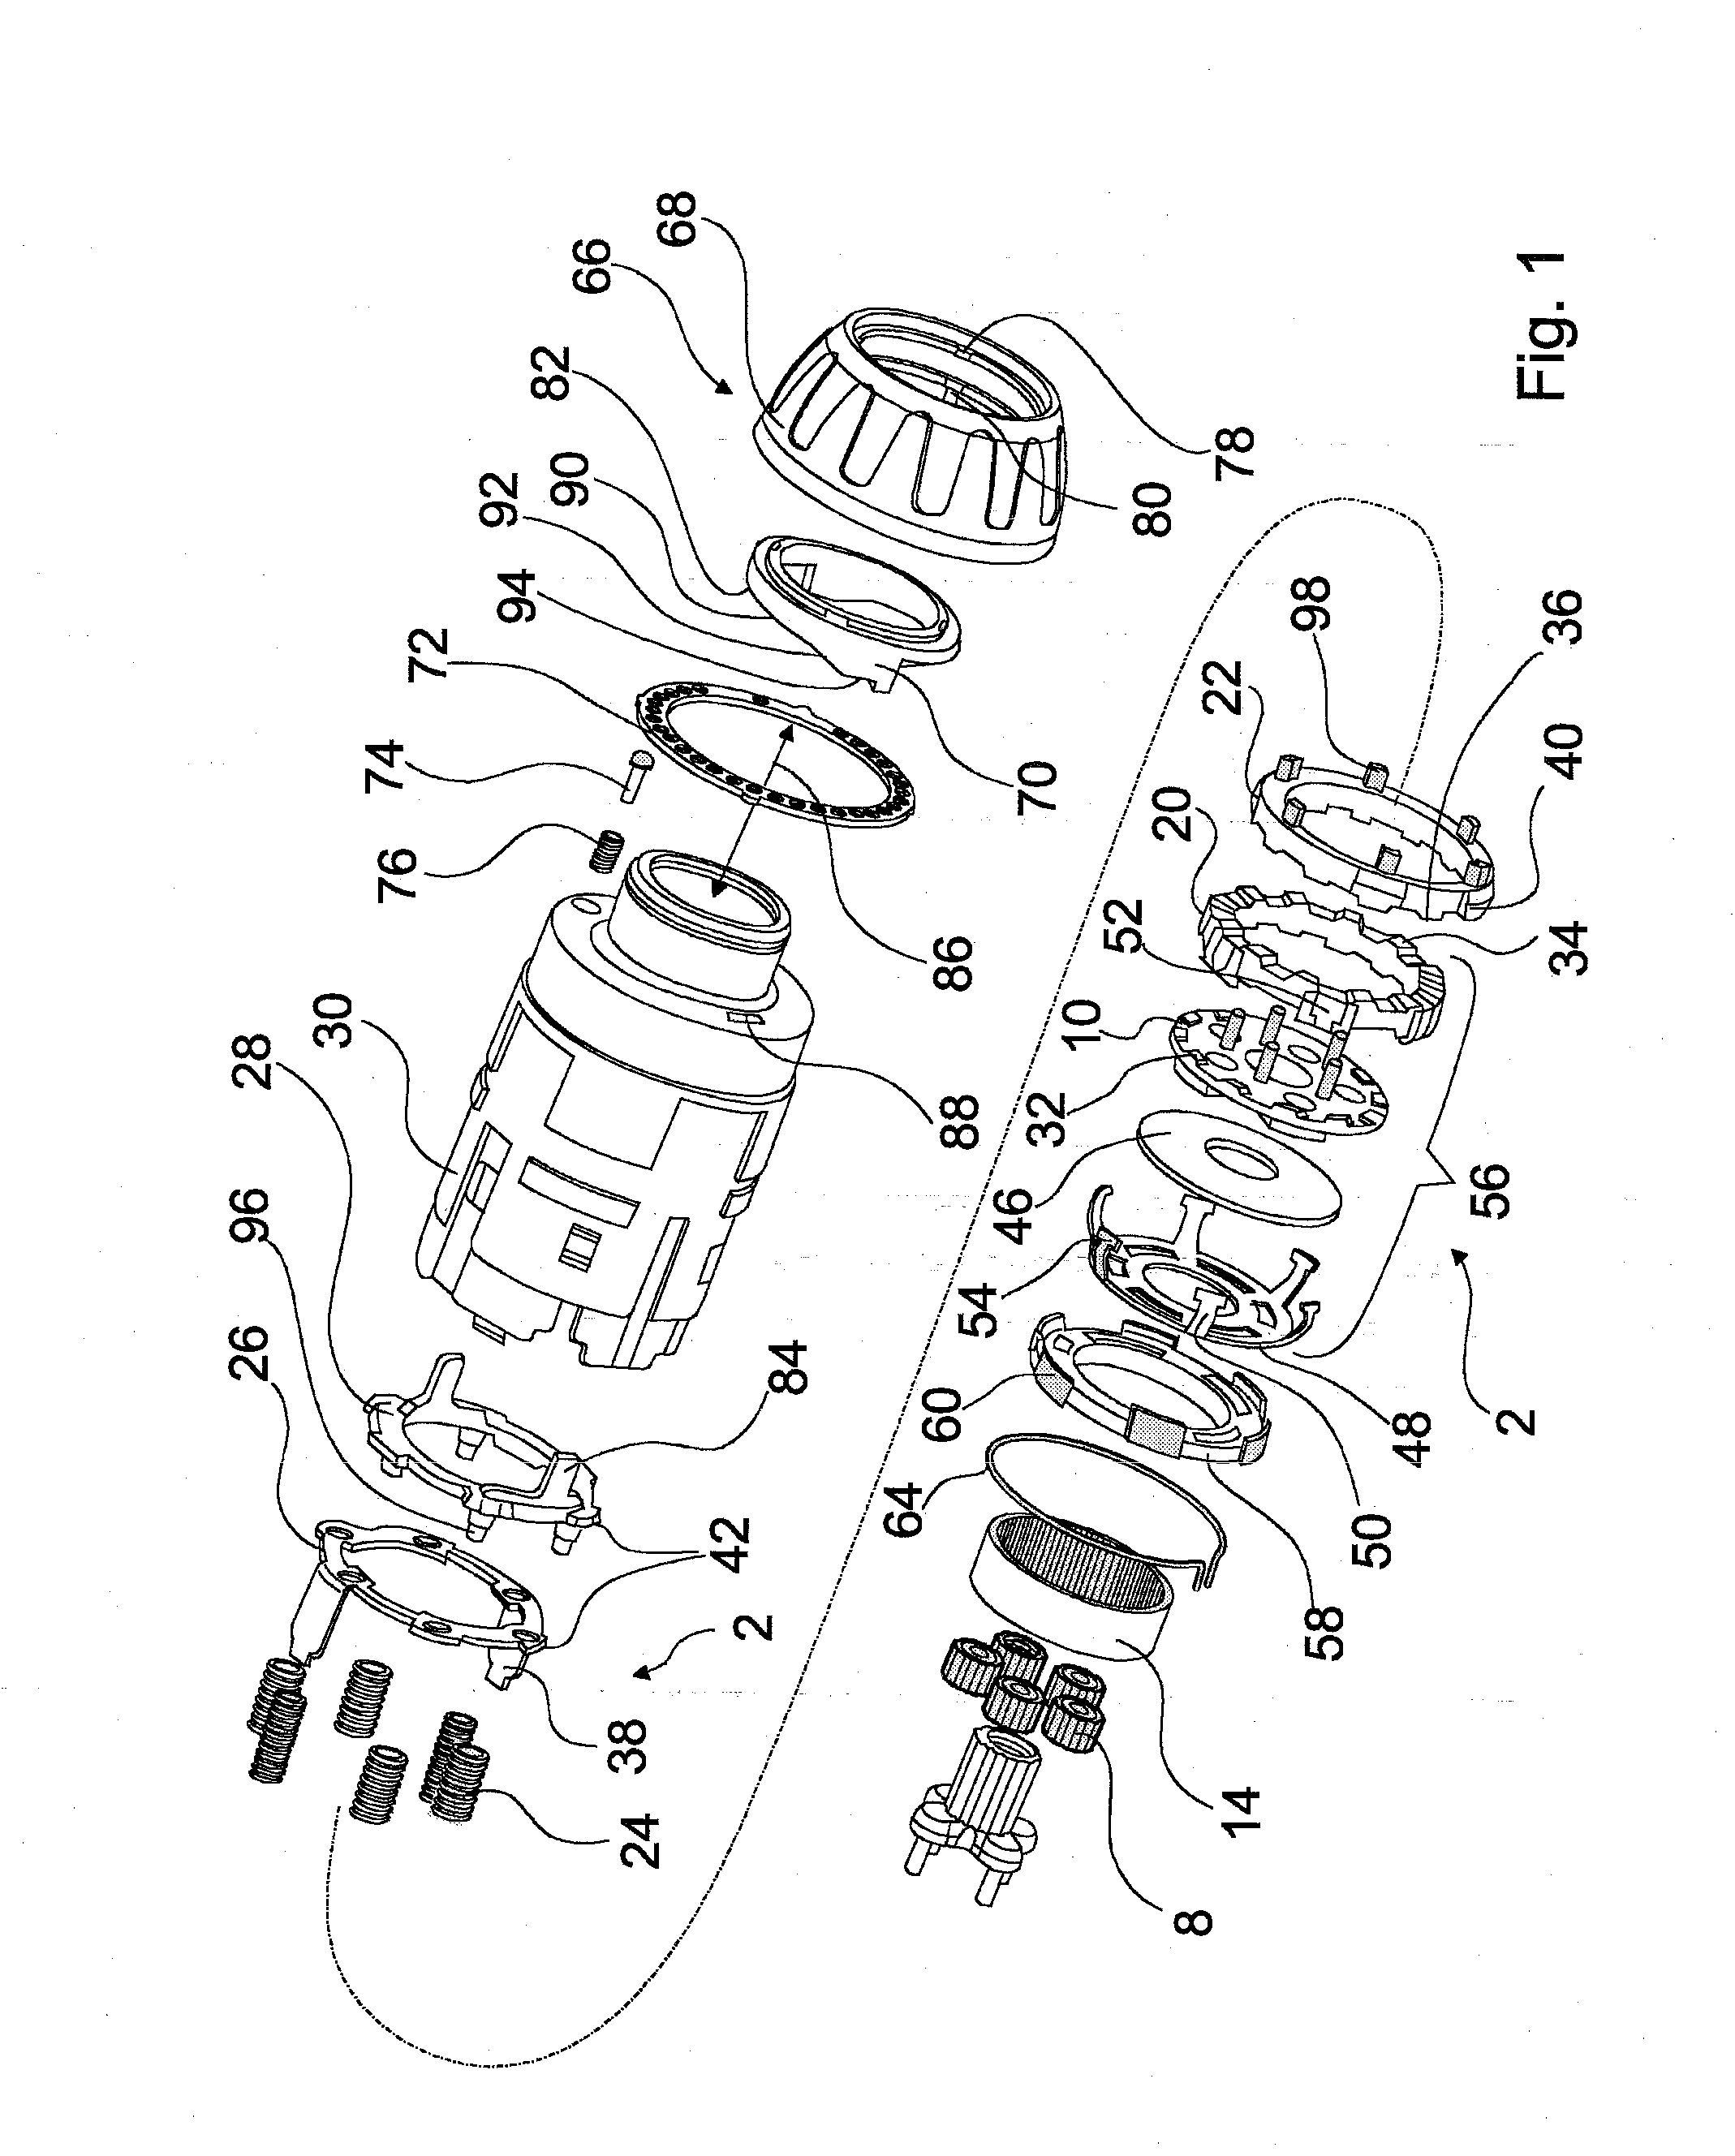 Hand-held power tool with torque limiter